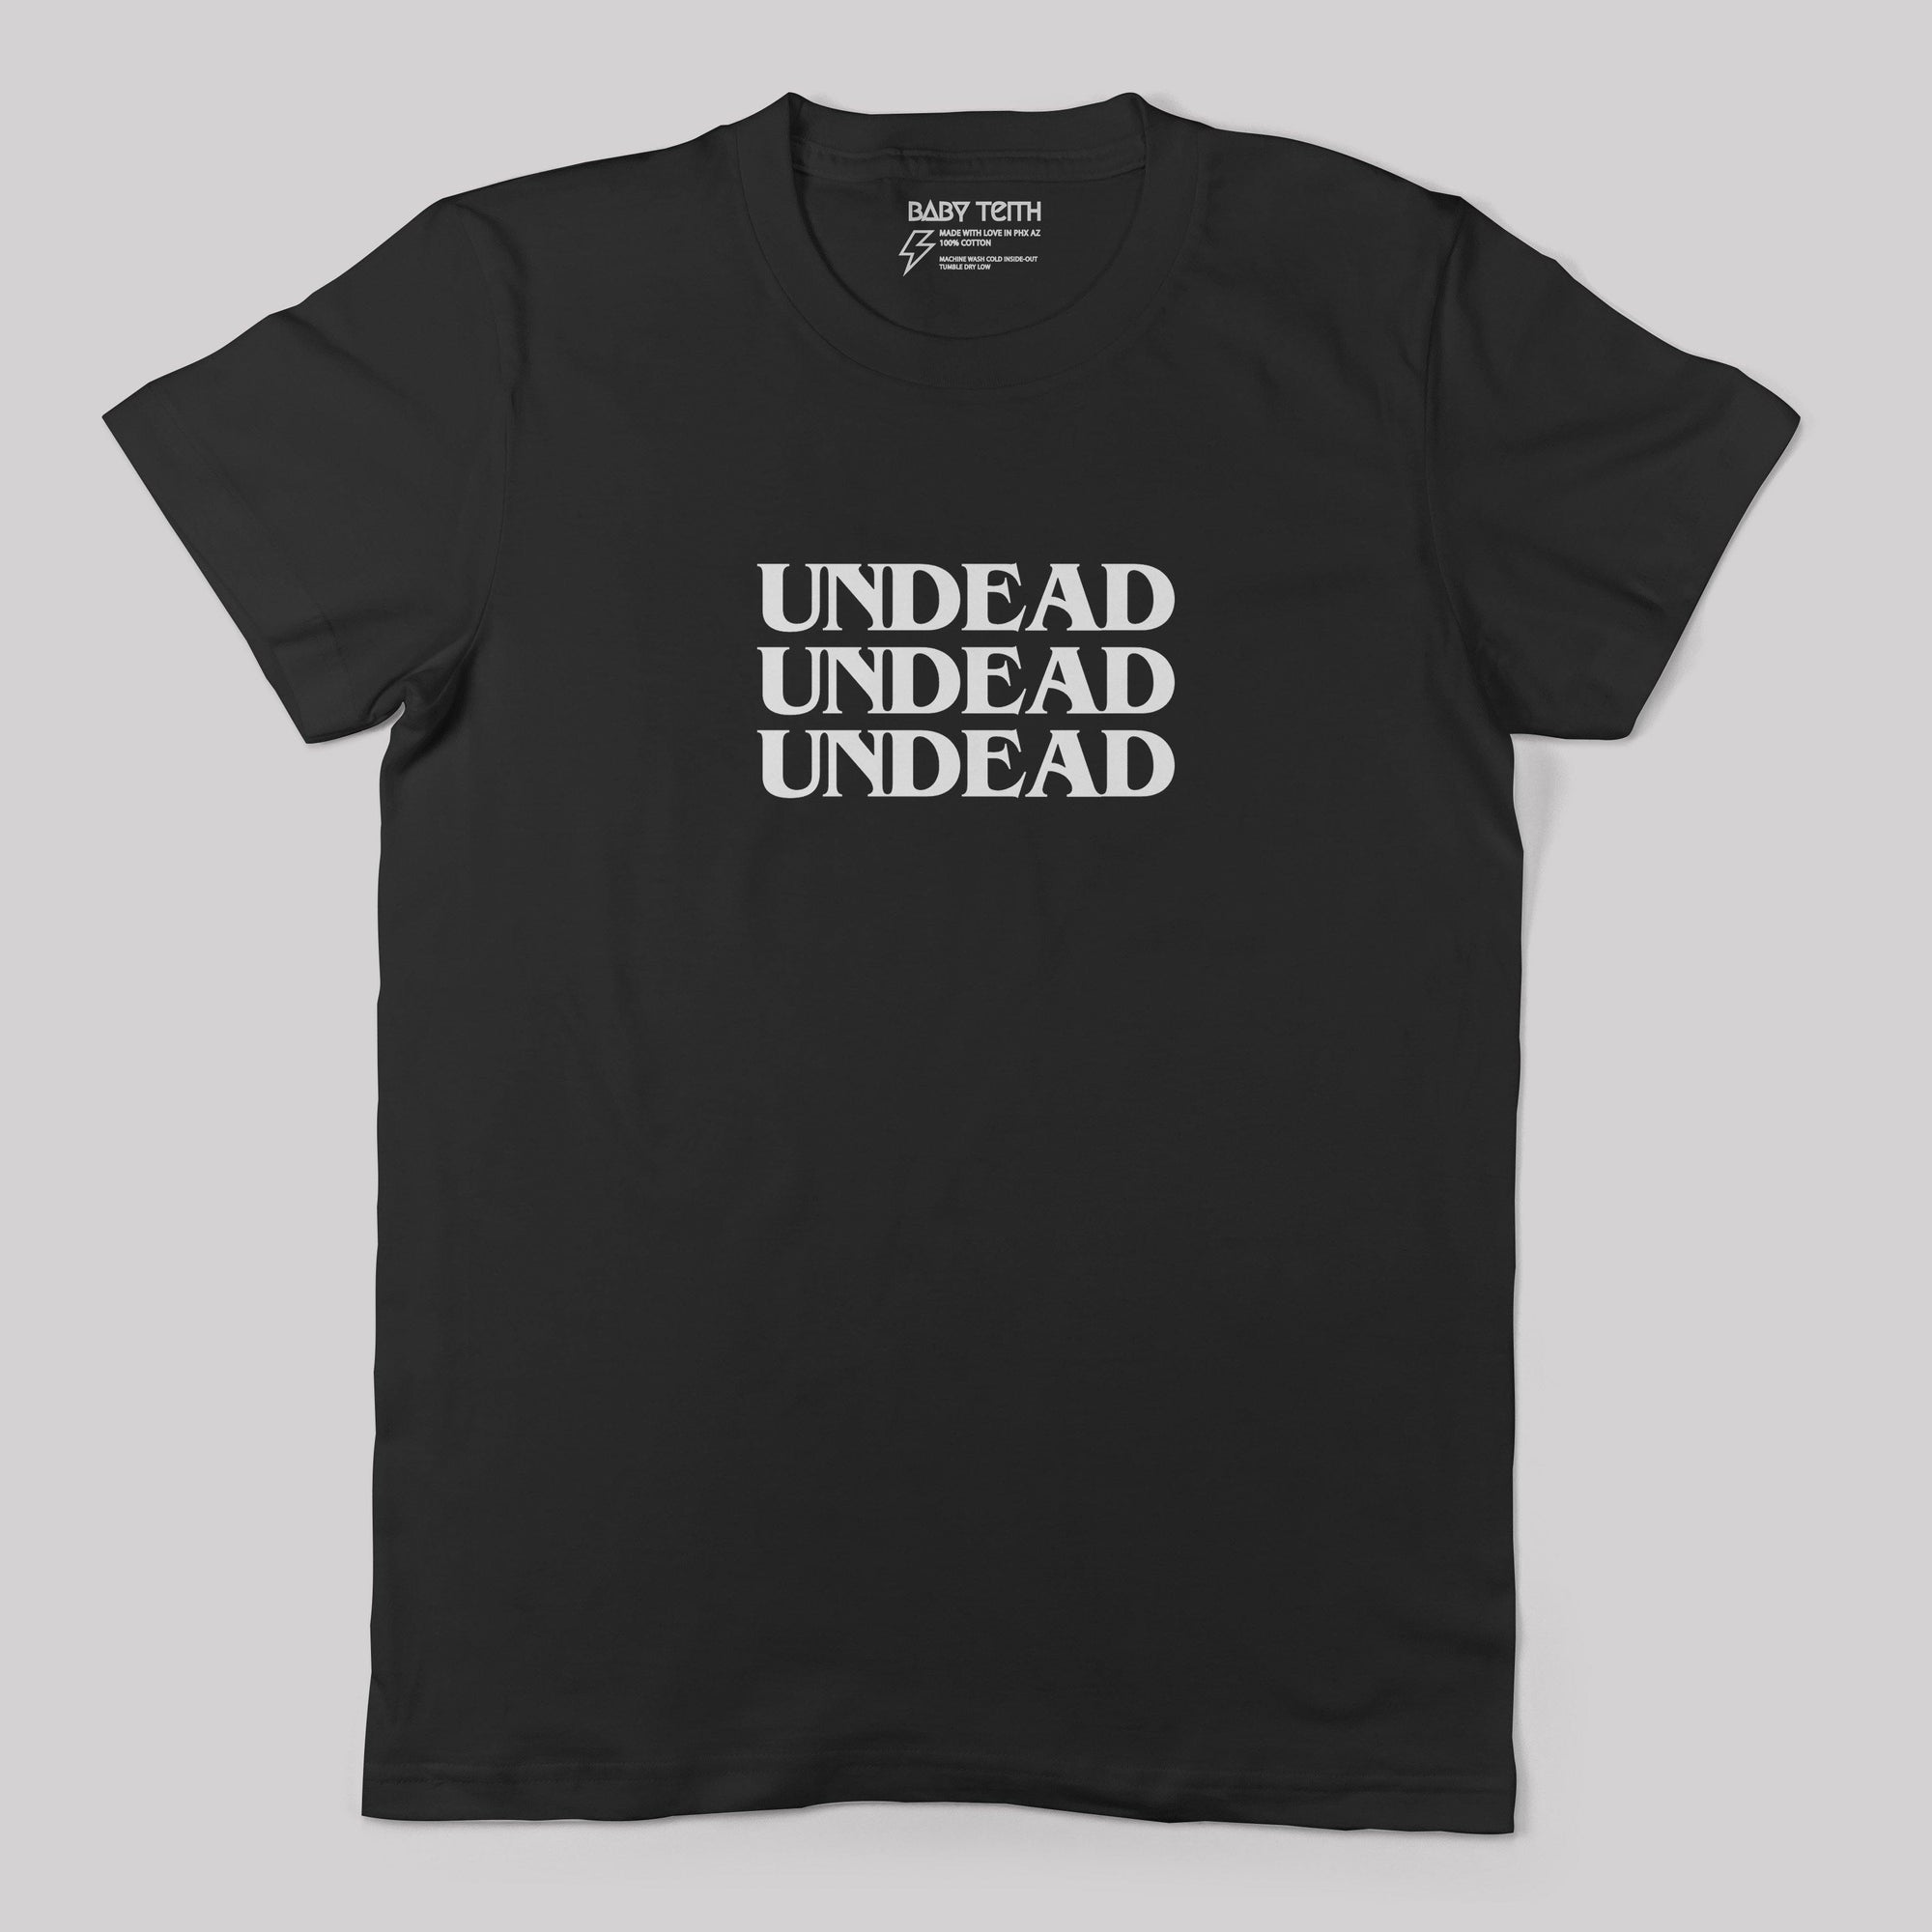 Undead Unisex Tee for Adults (4 Colors) - Baby Teith